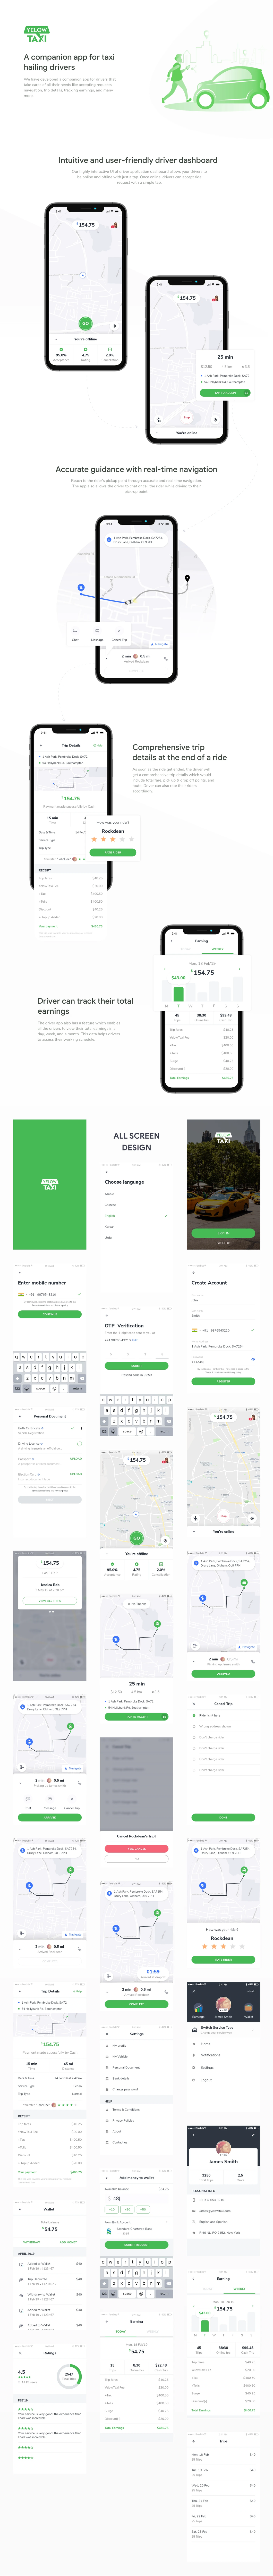 Yelow Taxi Driver App for Adobe XD - It’s driver app acts as a companion with its user-friendly UI and advanced features like real-time navigation, offline/online mode, view earnings, and many more. Minimal and clean app design, 50+ screens for you to get started.